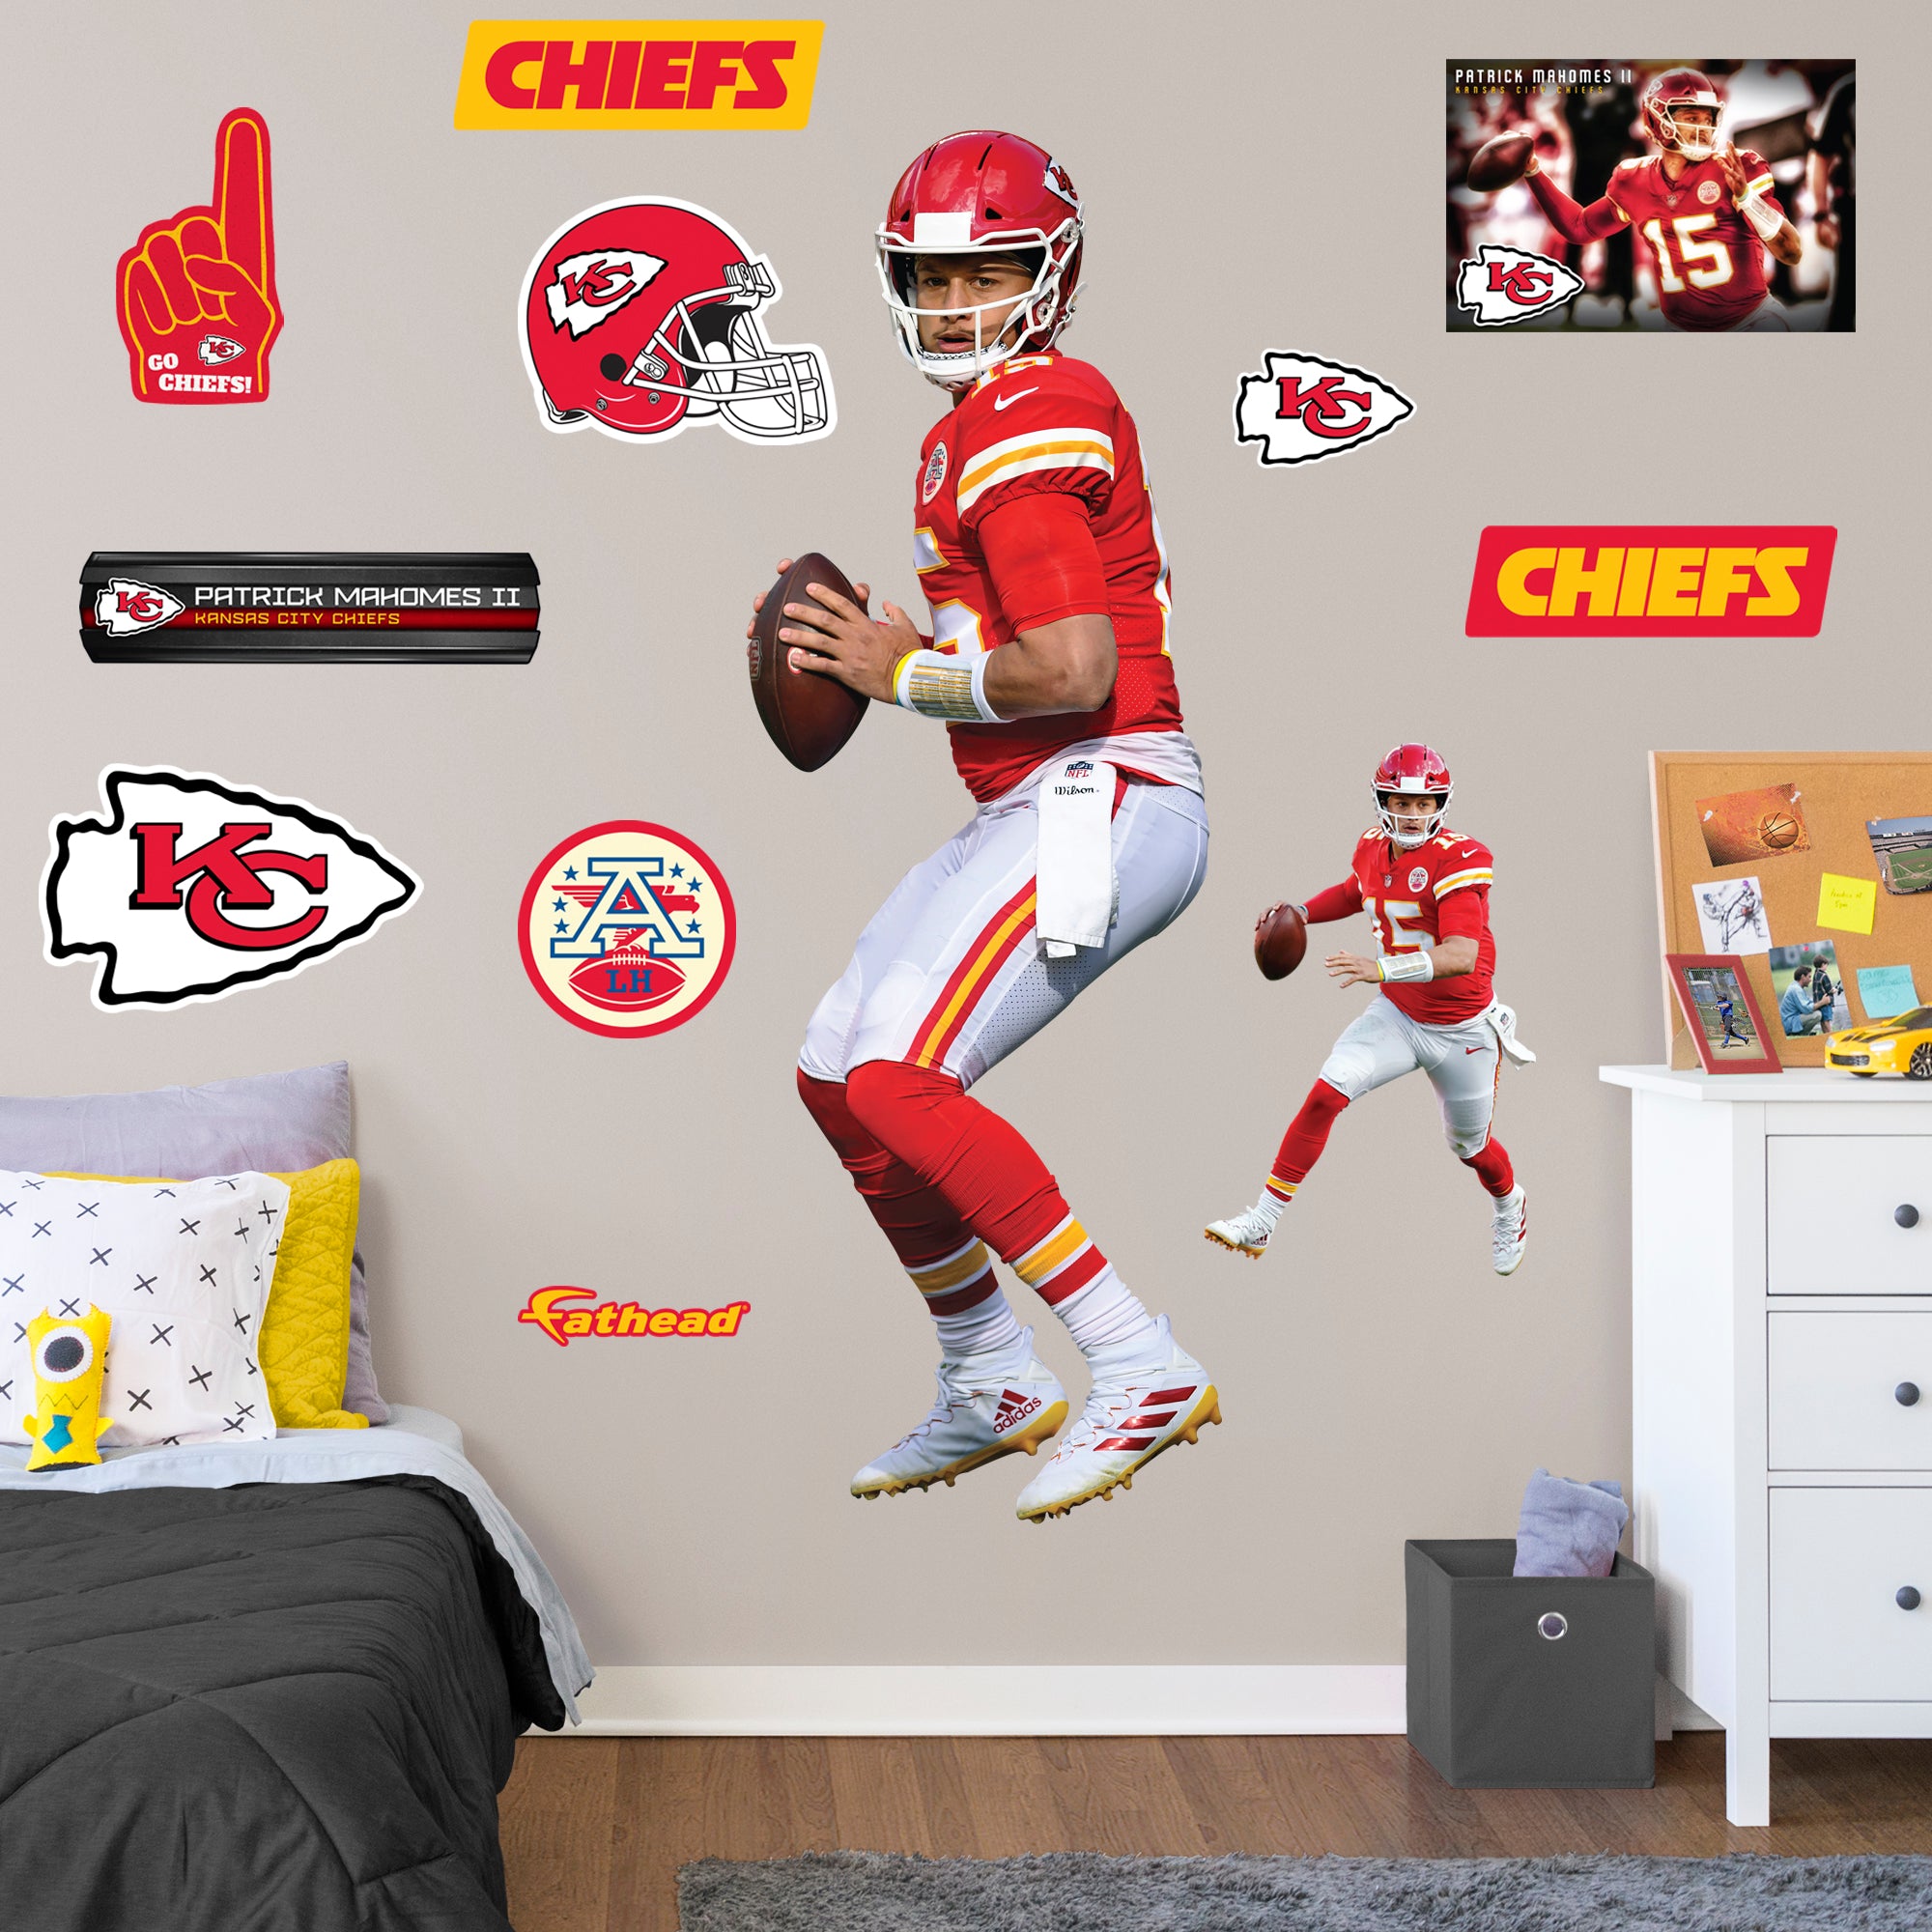 Patrick Mahomes II 2020 Pocket - Officially Licensed NFL Removable Wall Decal Life-Size Athlete + 11 Decals (26"W x 76"H) by Fat